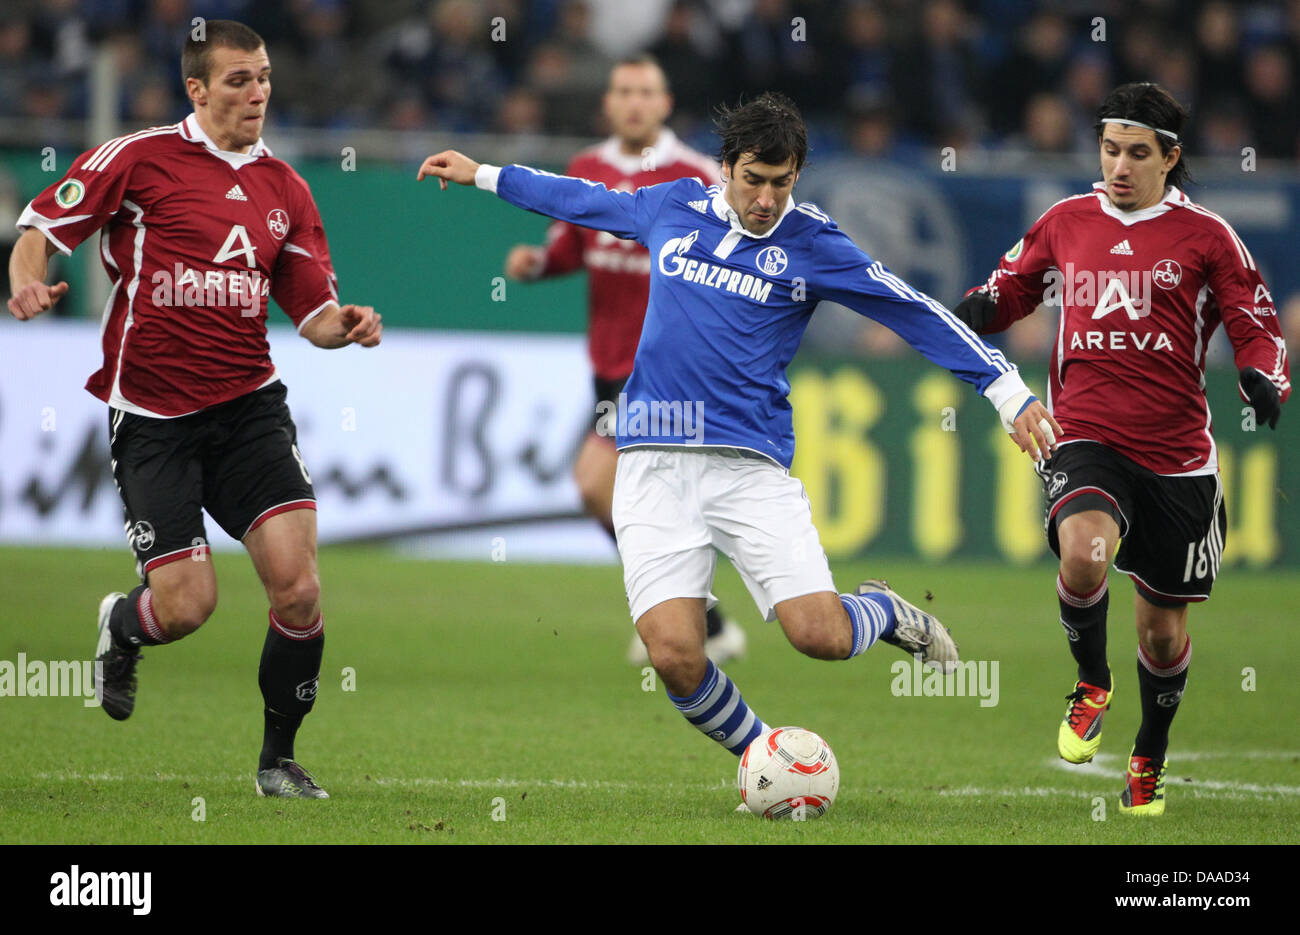 Soccer Quarter-Finale: FC Schalke 04 versus 1.FC: Nürnberg on 25 January 2011 at the Veltins-Arena in Gelsenkirchen, Germany. Schalke player Raul Gonzales Blanco (middle) is fighting for the ball with Christian Eigler(L) and Almog Cohen (R)Photo: Friso Gentsch    (ATTENTION: The DFB prohibits the utilisation and publication of sequential pictures on the  internet and other online m Stock Photo